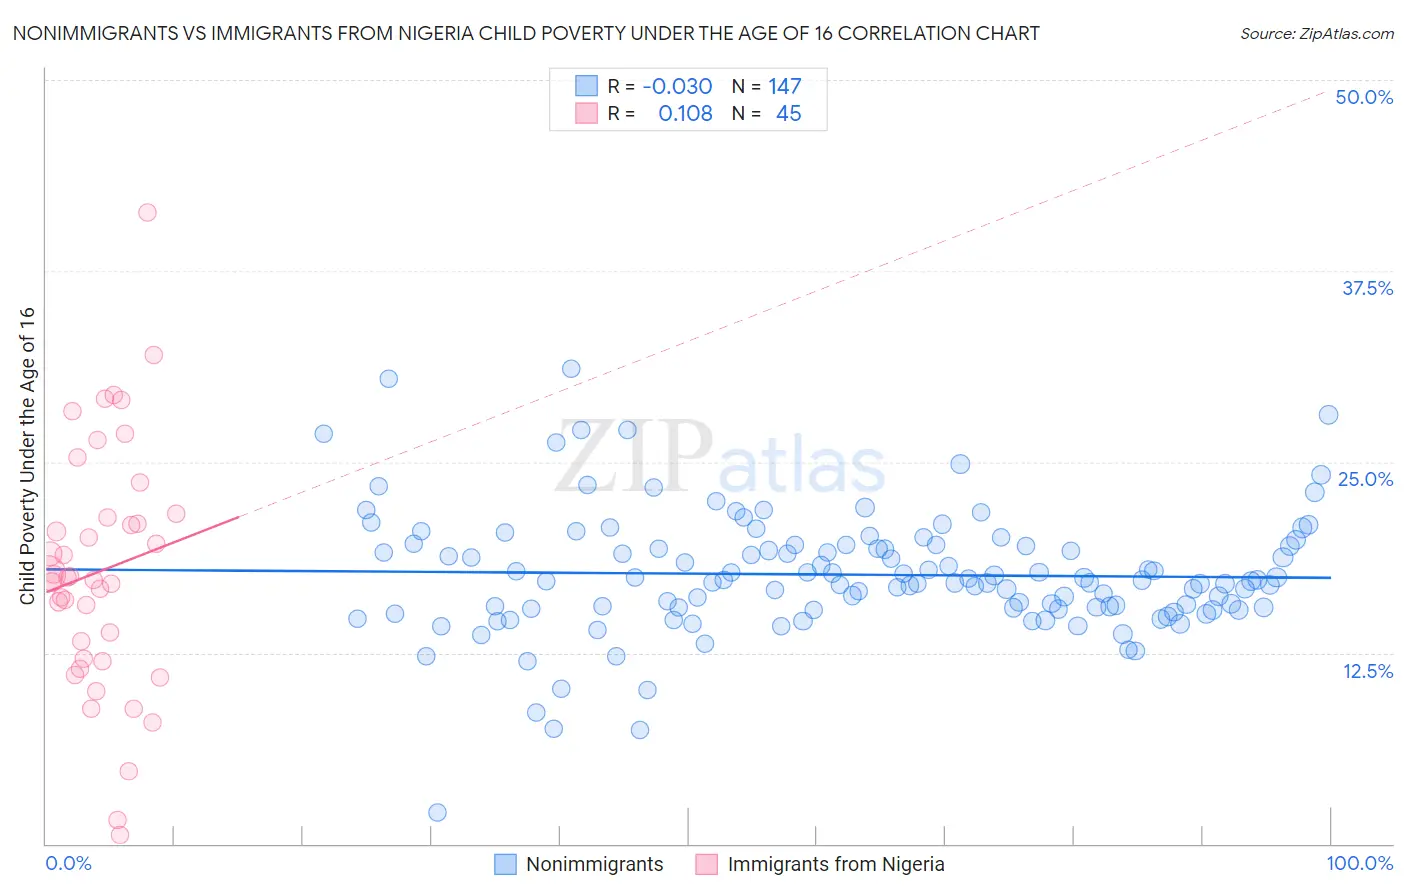 Nonimmigrants vs Immigrants from Nigeria Child Poverty Under the Age of 16